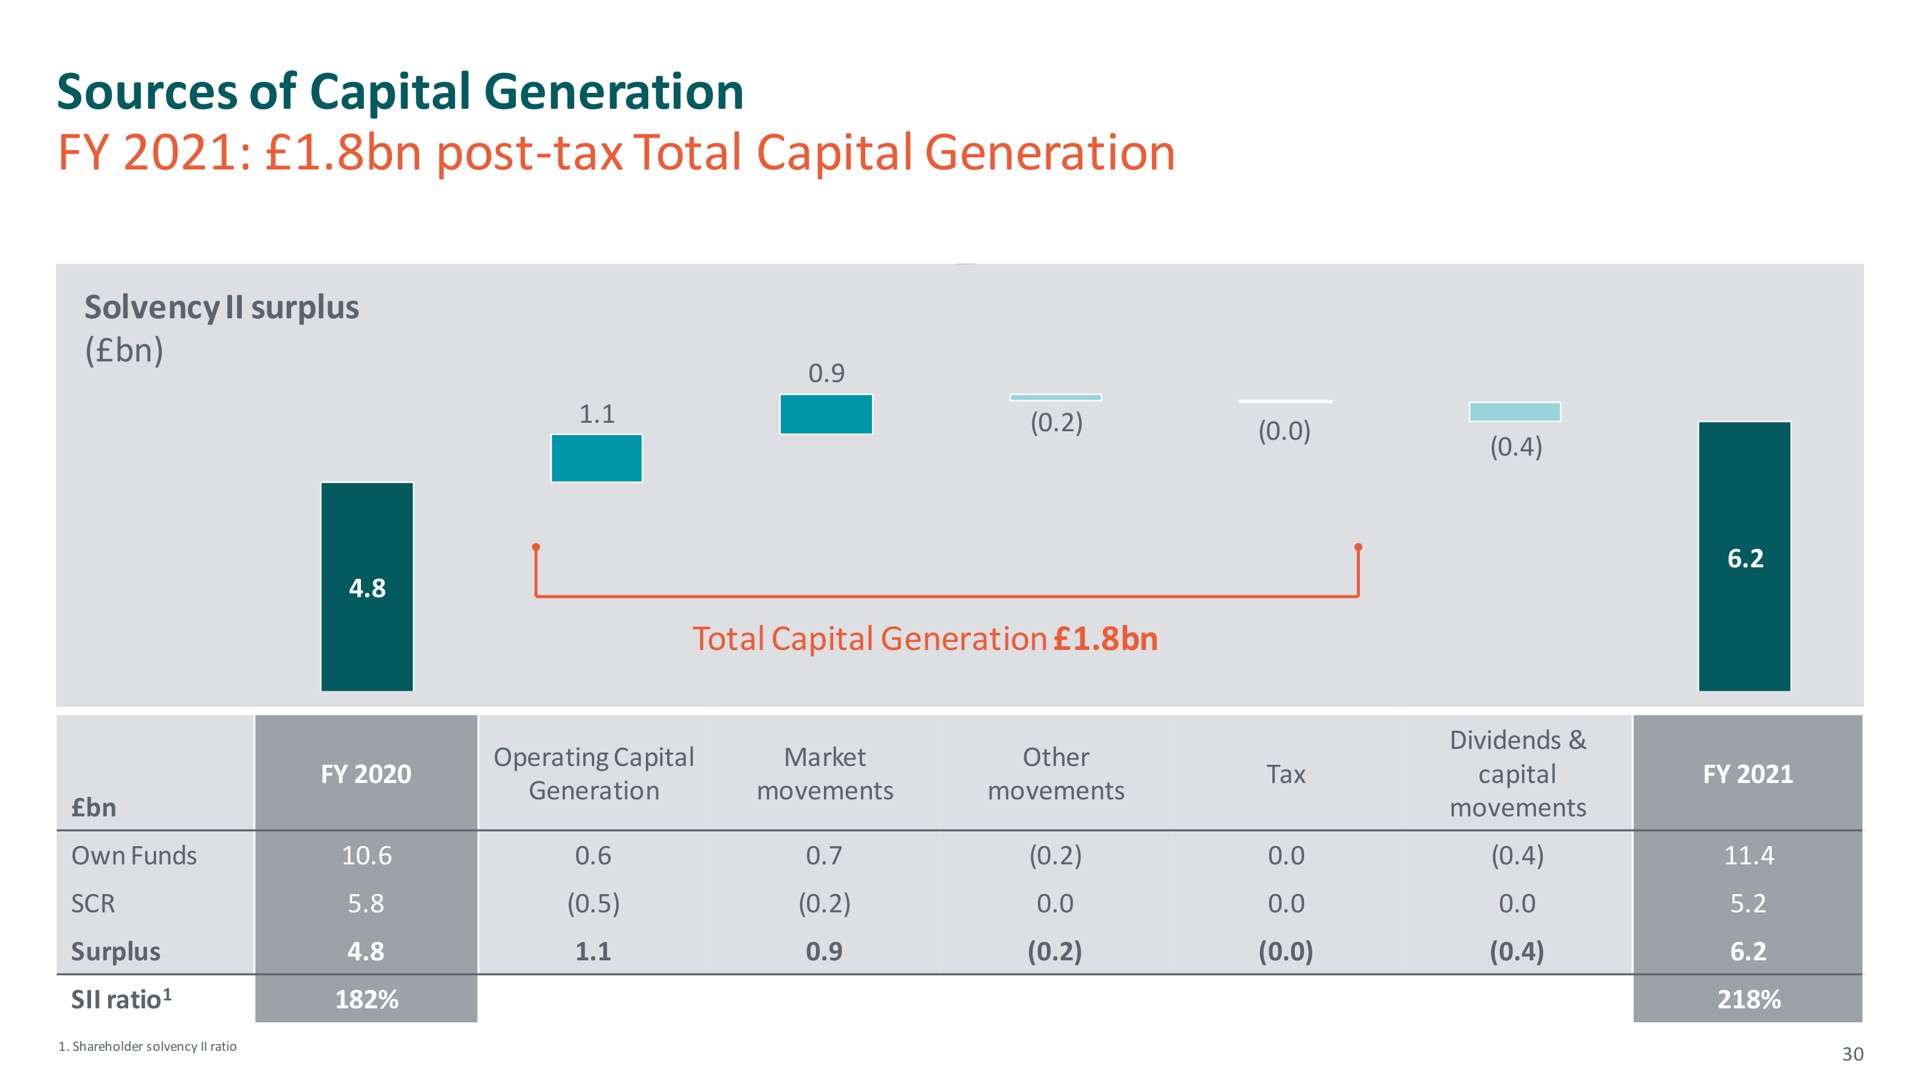 sources of capital generation post tax total capital generation | M&G